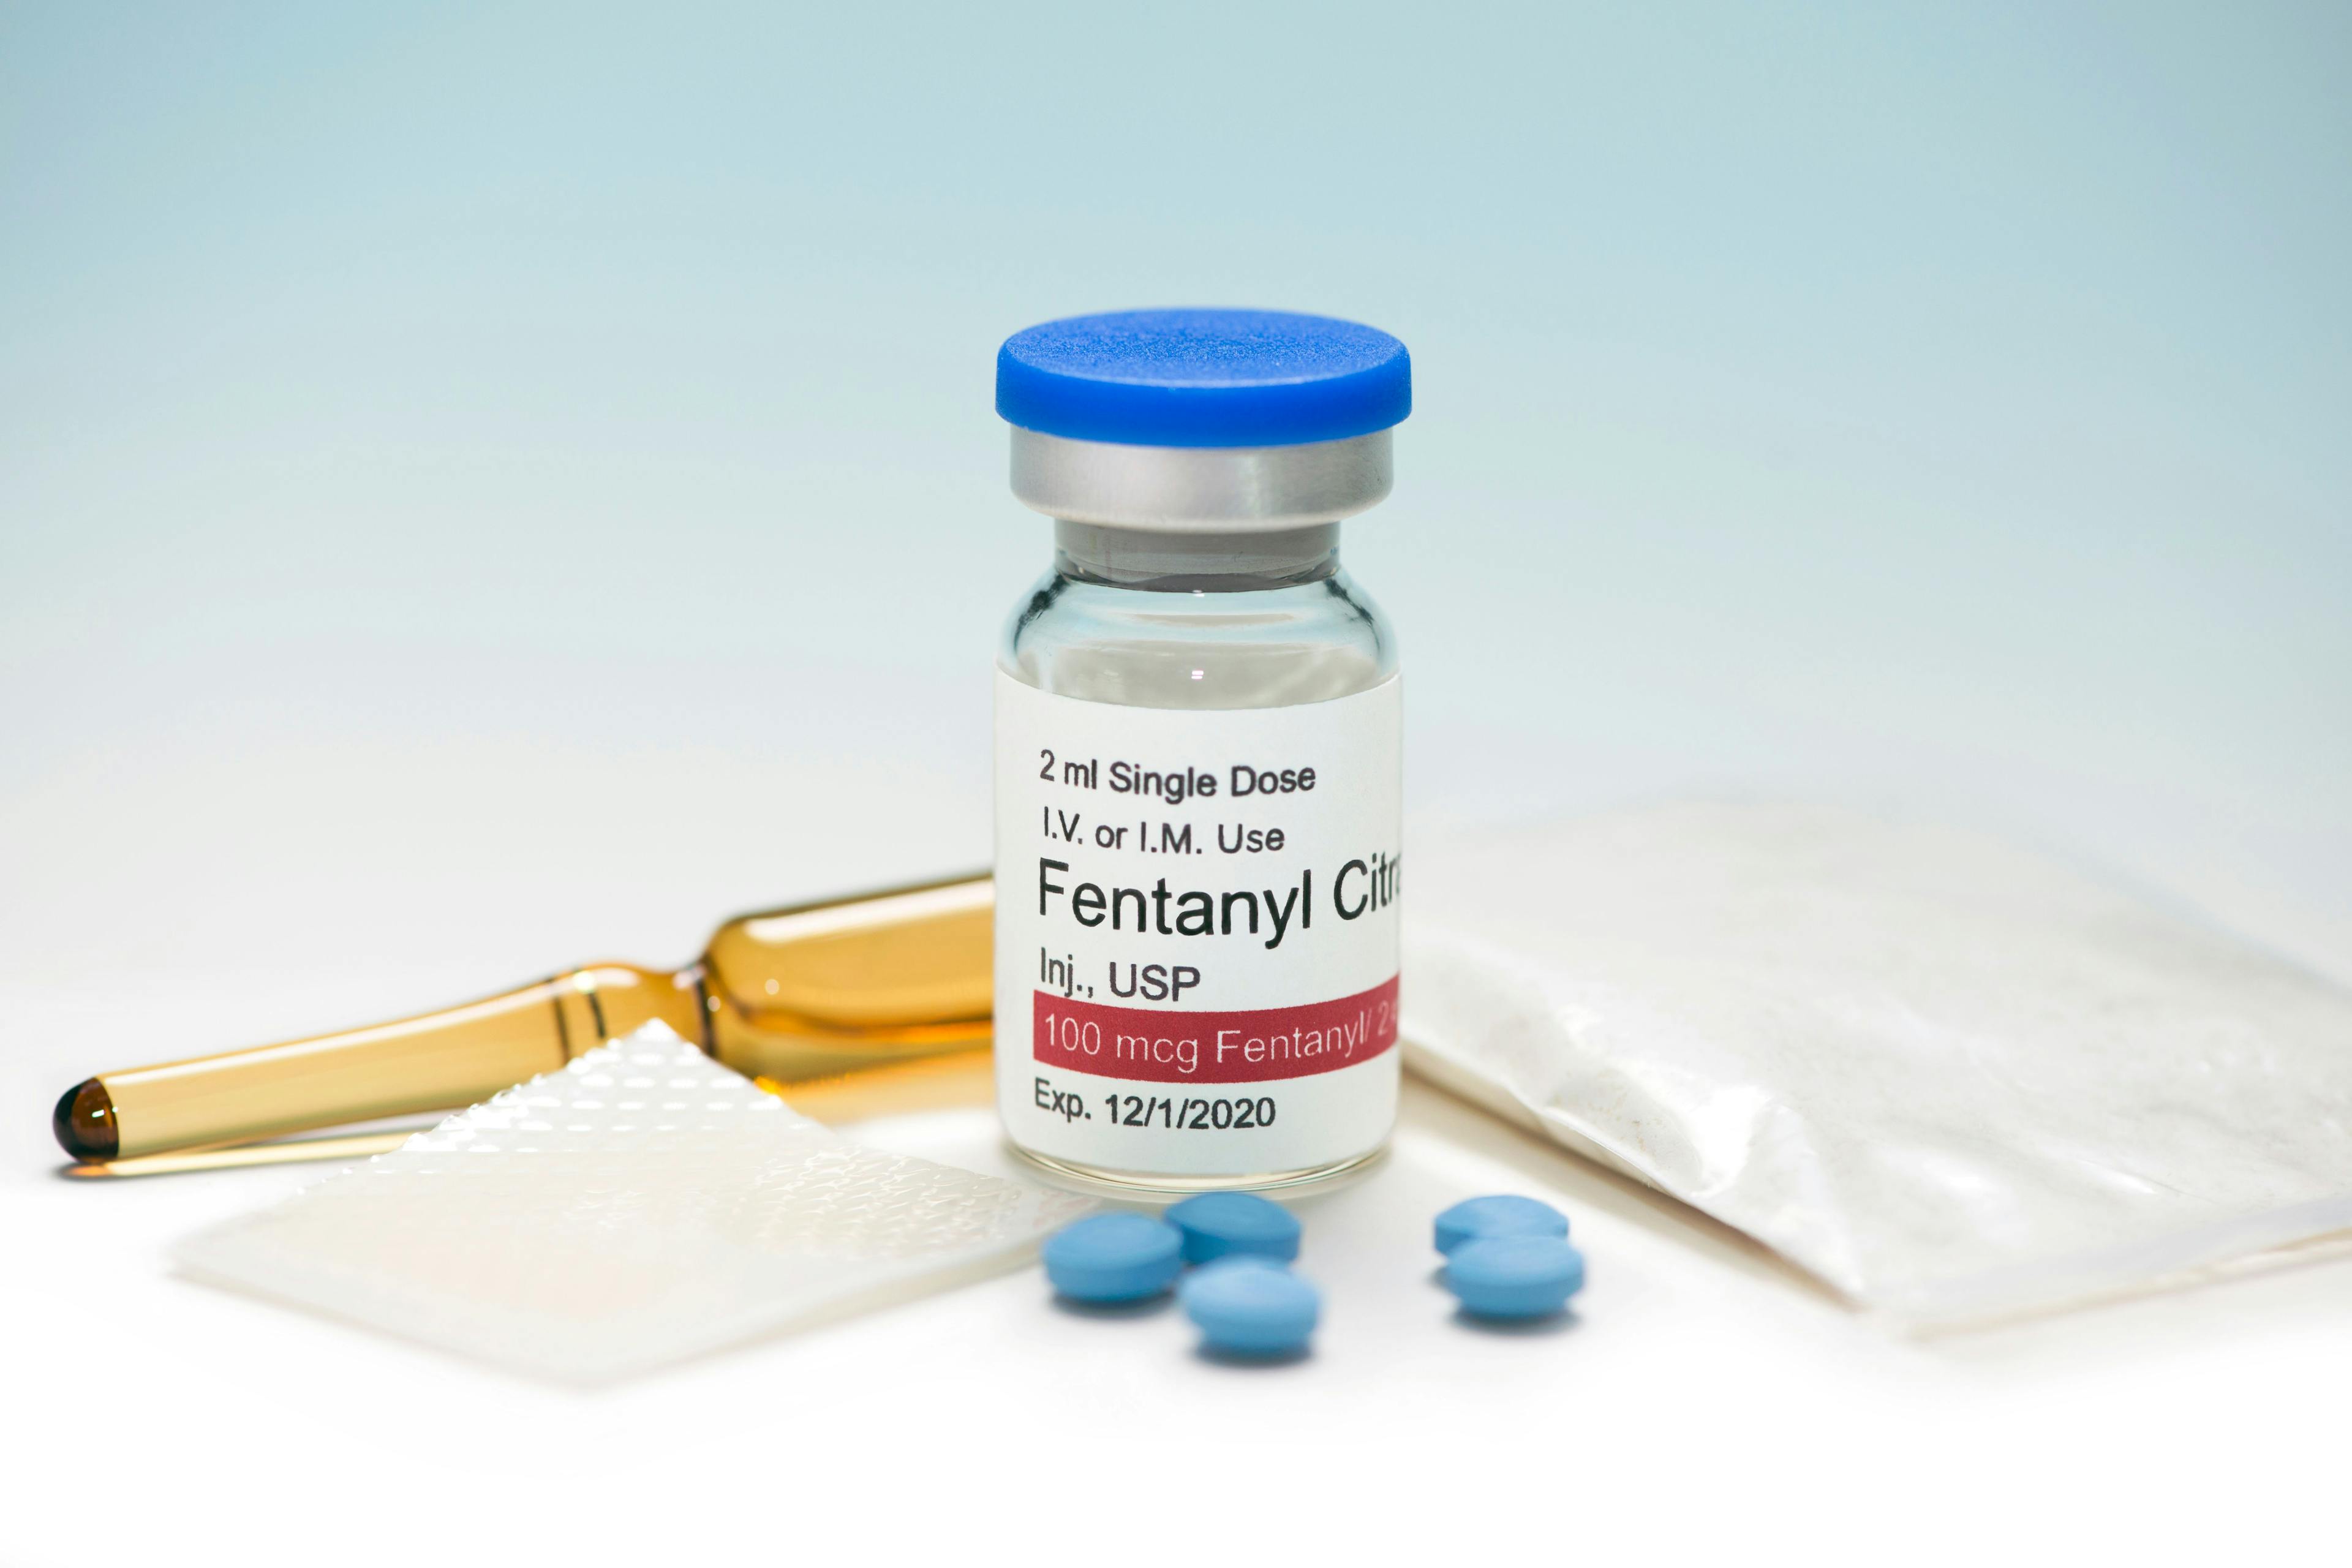 Forms of Fentanyl Citrate | Image Credit: © Sherry Young - stock.adobe.com